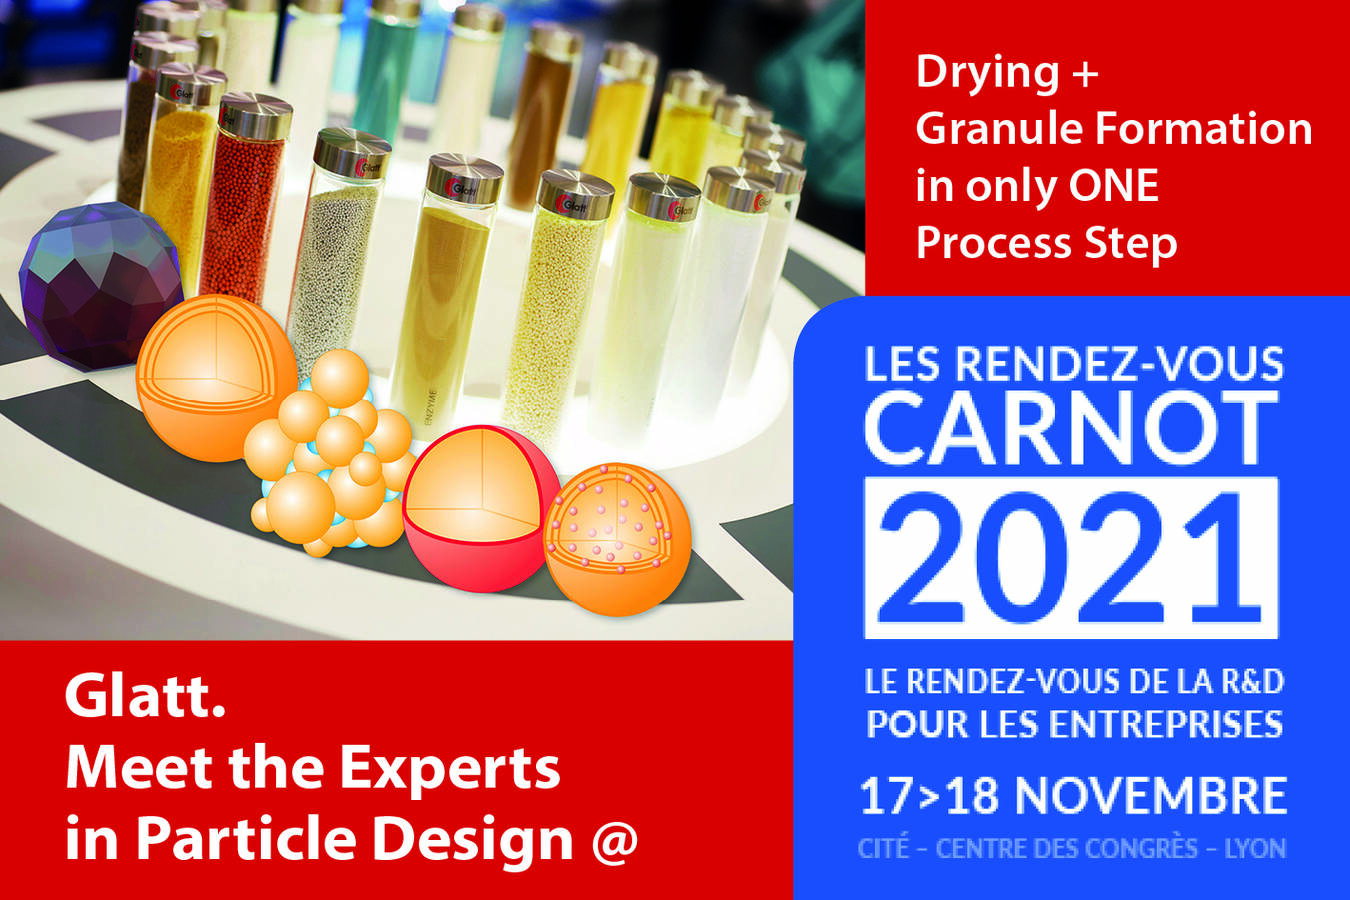 Glatt Experts for Particle Design at Les Rendez-Vous Carnot 2021 Forming + drying in one step: granulating, coating, encapsulating, drying, functionalizing powders and liquids with fluid bed technologies.